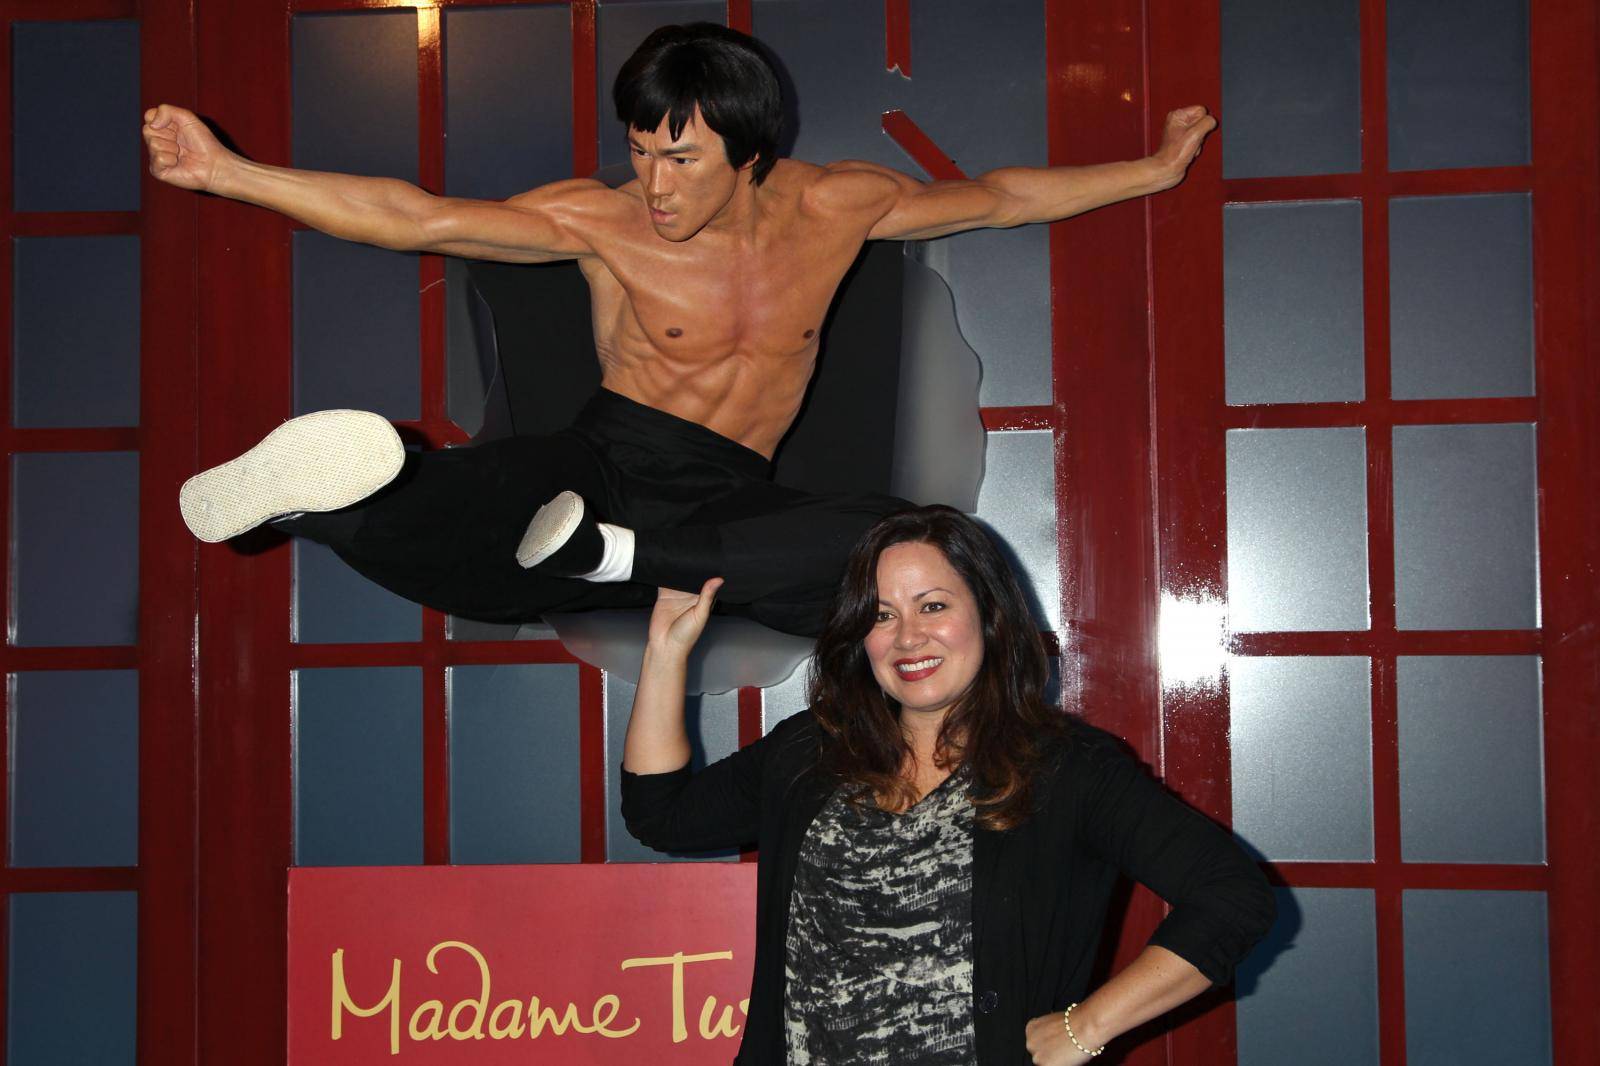 Madame Tussauds Hollywood with Shannon Lee (Bruce.s daughter) unveil their new Bruce Lee wax action figure in Hollywood, California. by Baxter